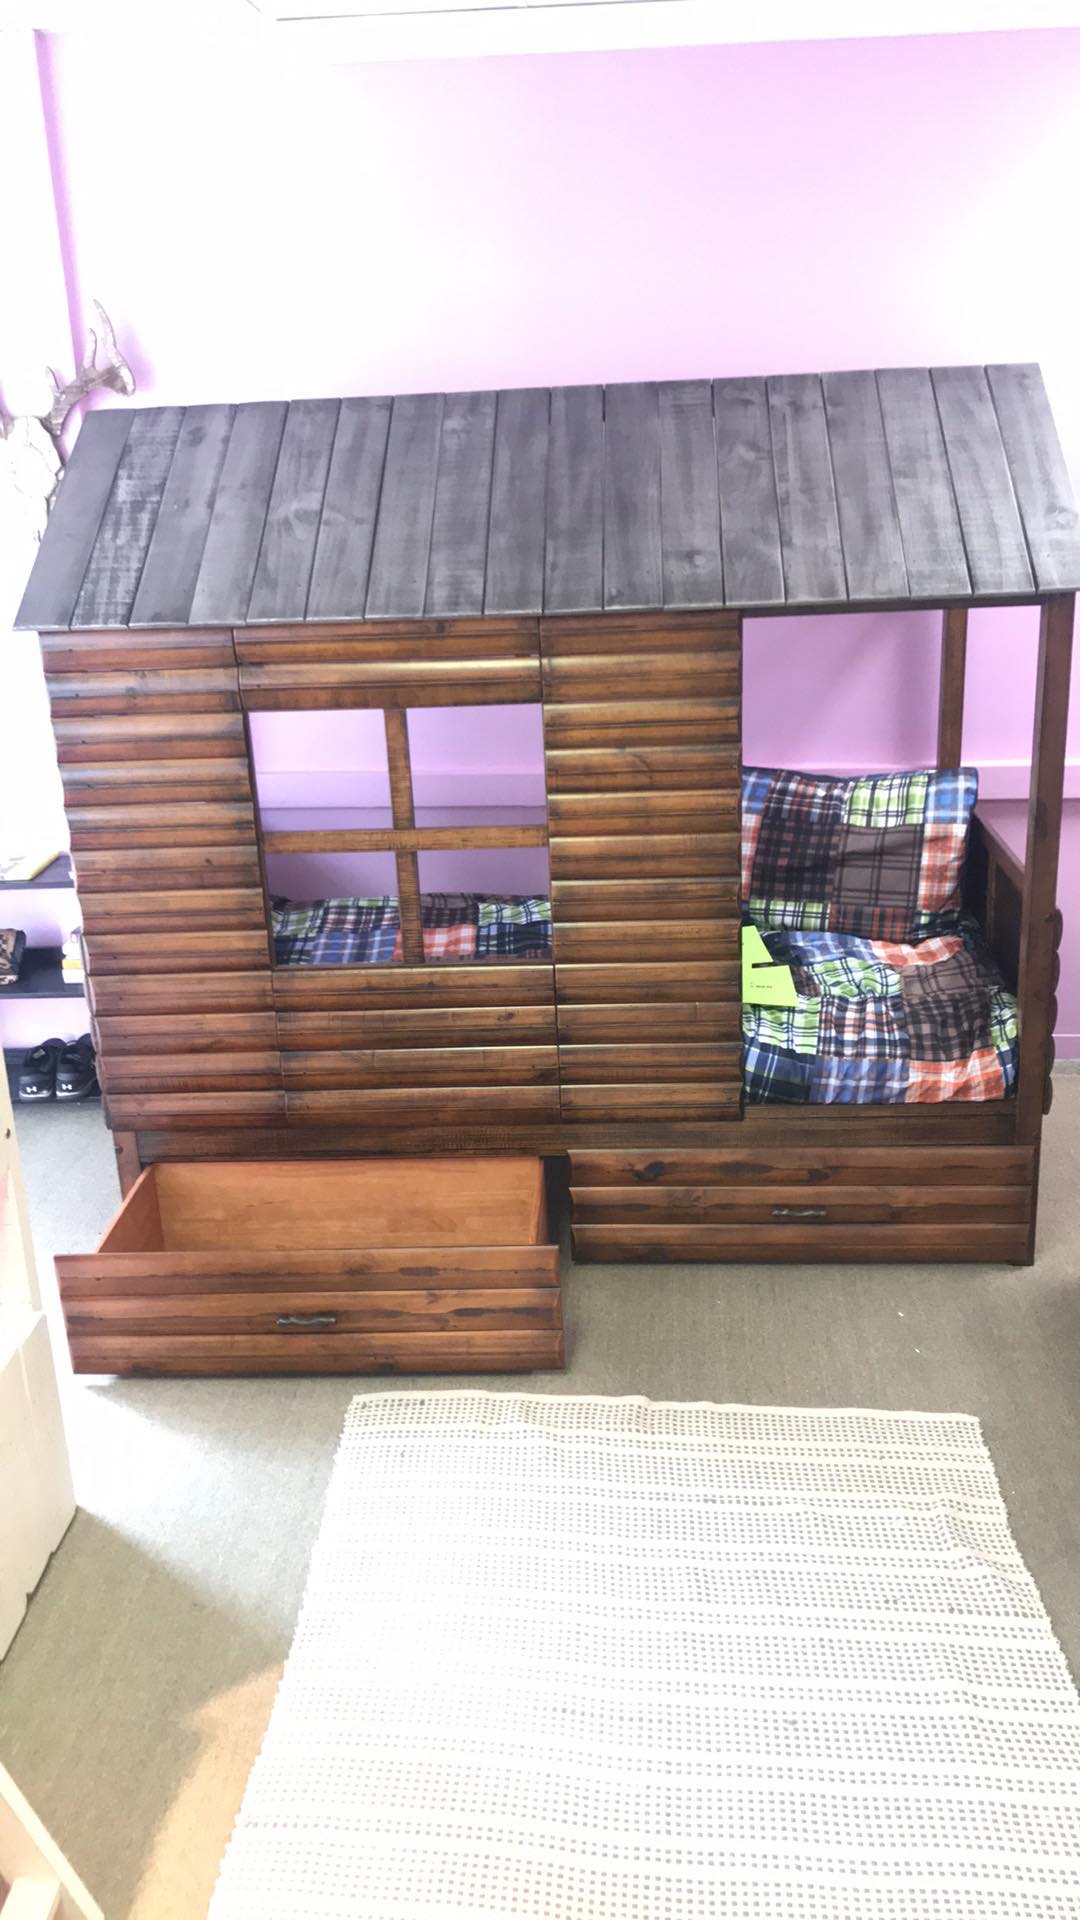 WEEKLY or MONTHLY. Twin Log Cabin Low Loft Bed with Dual Underbed Drawers